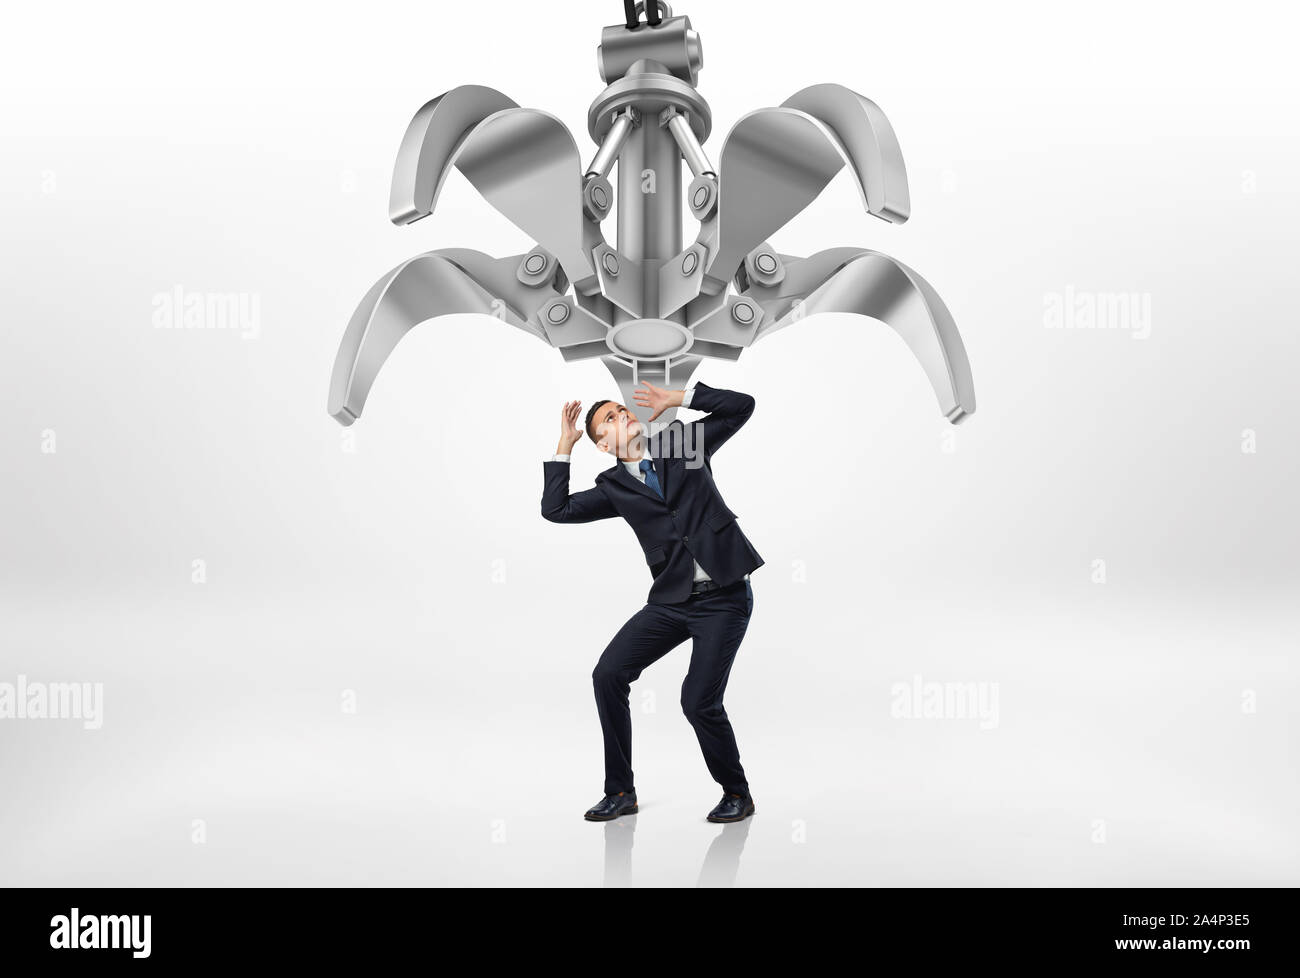 Frightened businessman in protective pose looking up at giant mechanical claw above him Stock Photo